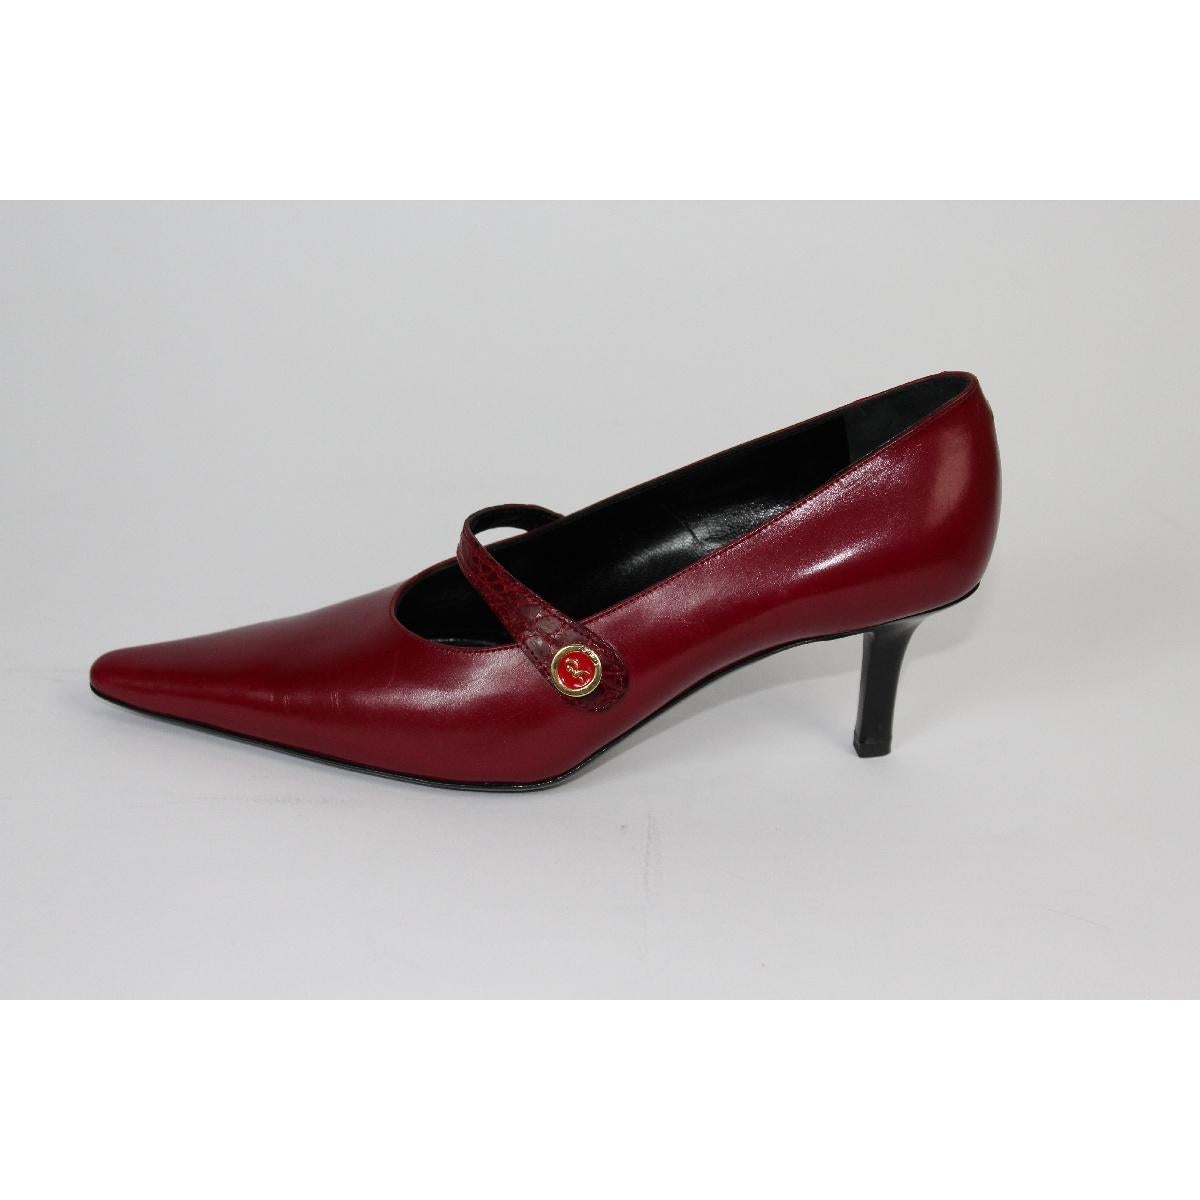 These Roberta di Camerino vintage red pump heels from the 1980s are the perfect statement shoes for any fashion-forward individual. Crafted in Italy from high-quality leather, they are both stylish and durable. These shoes have never been worn